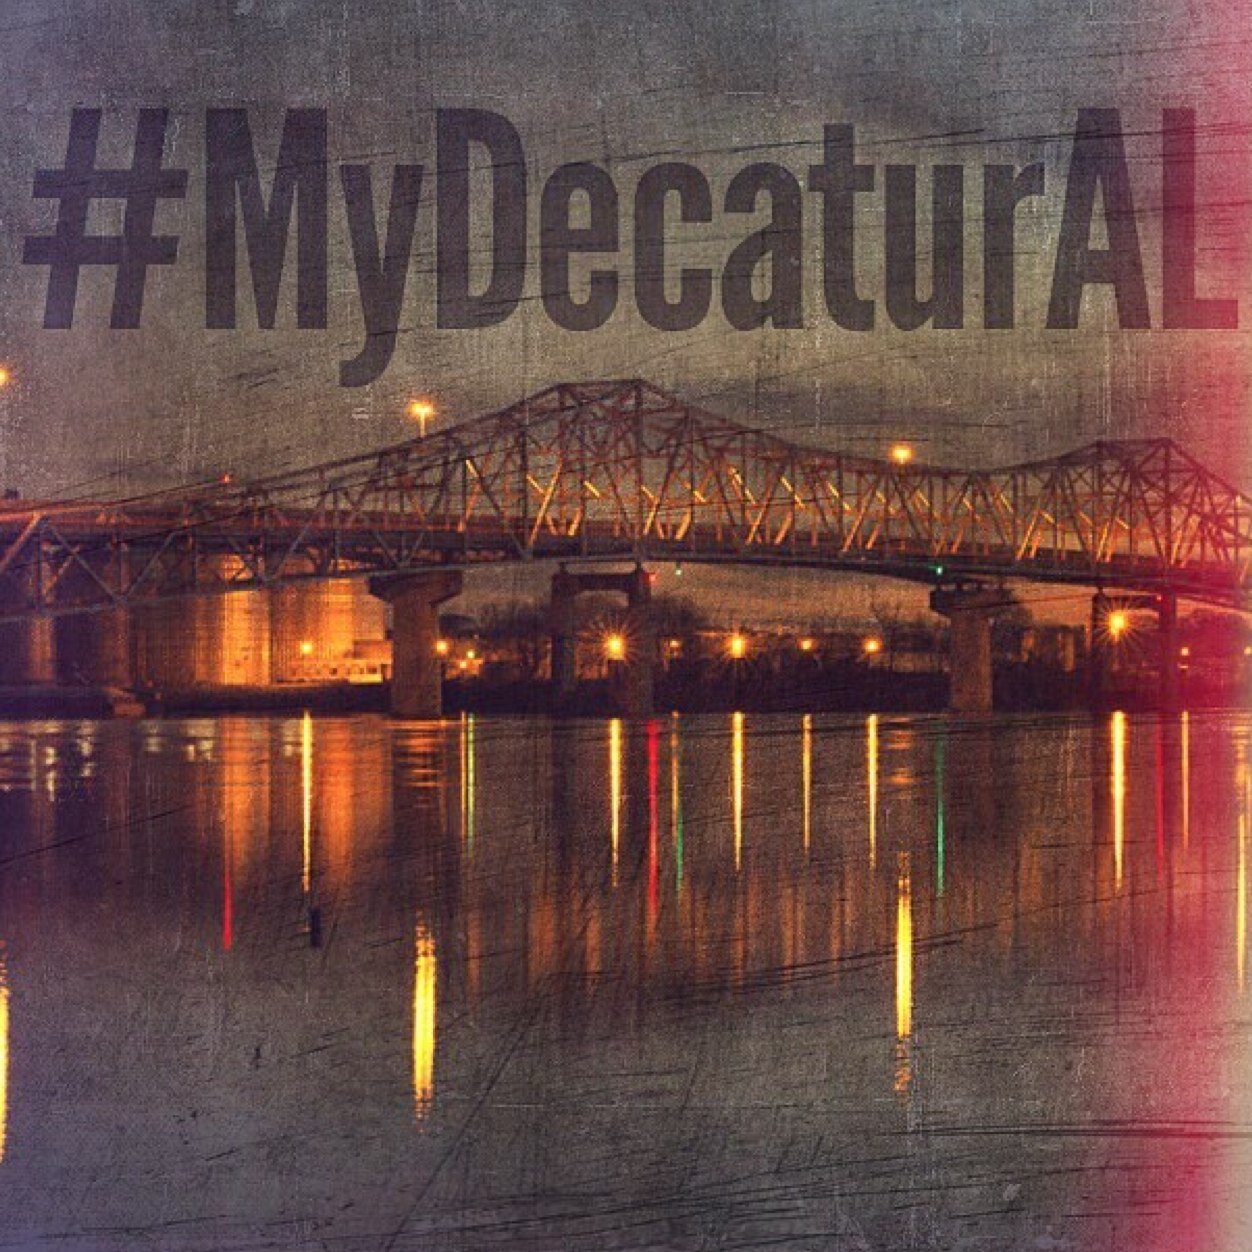 Official twitter for My Decatur, AL
Tag all things Decatur with #MyDecaturAL